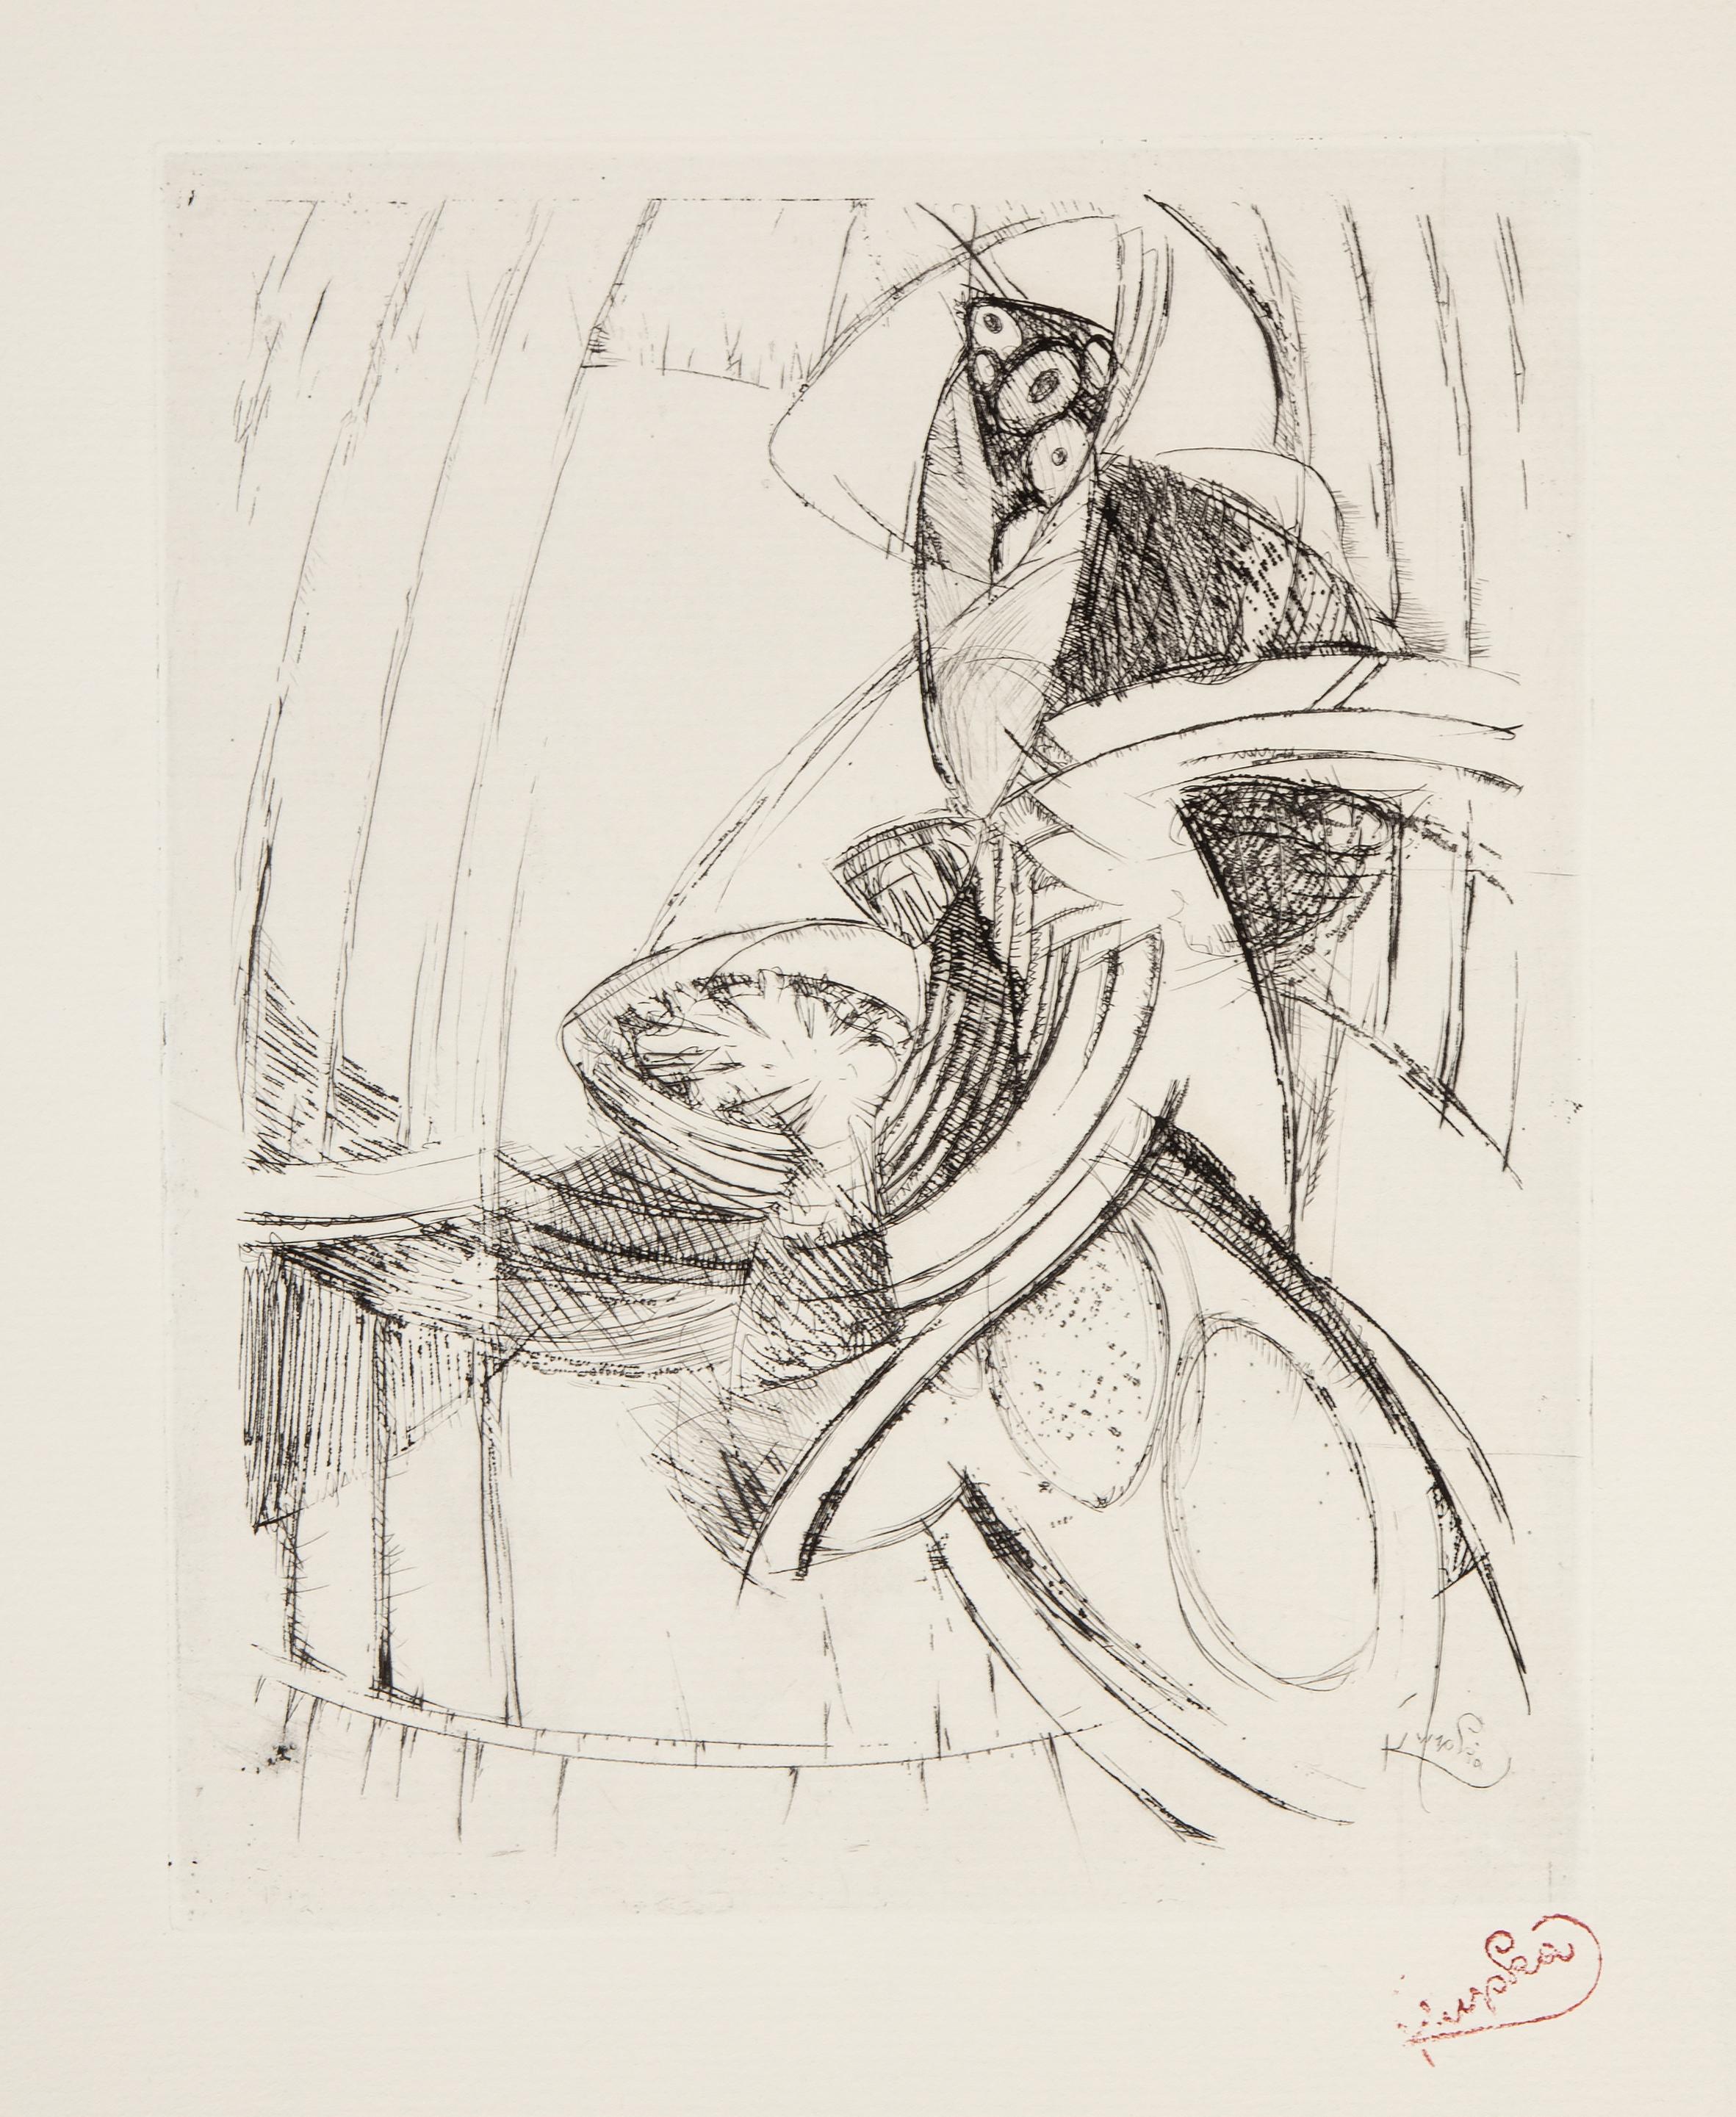 Frantisek Kupka, Czech (1871 - 1957) - Sons de Cloches. Year: 1912, Medium: Etching on Richard de Bas, stamp signed, Image Size: 11 x 8.75 inches, Size: 20 x 12.75 in. (50.8 x 32.39 cm), Description: From the collection of the late Larry Saphire.